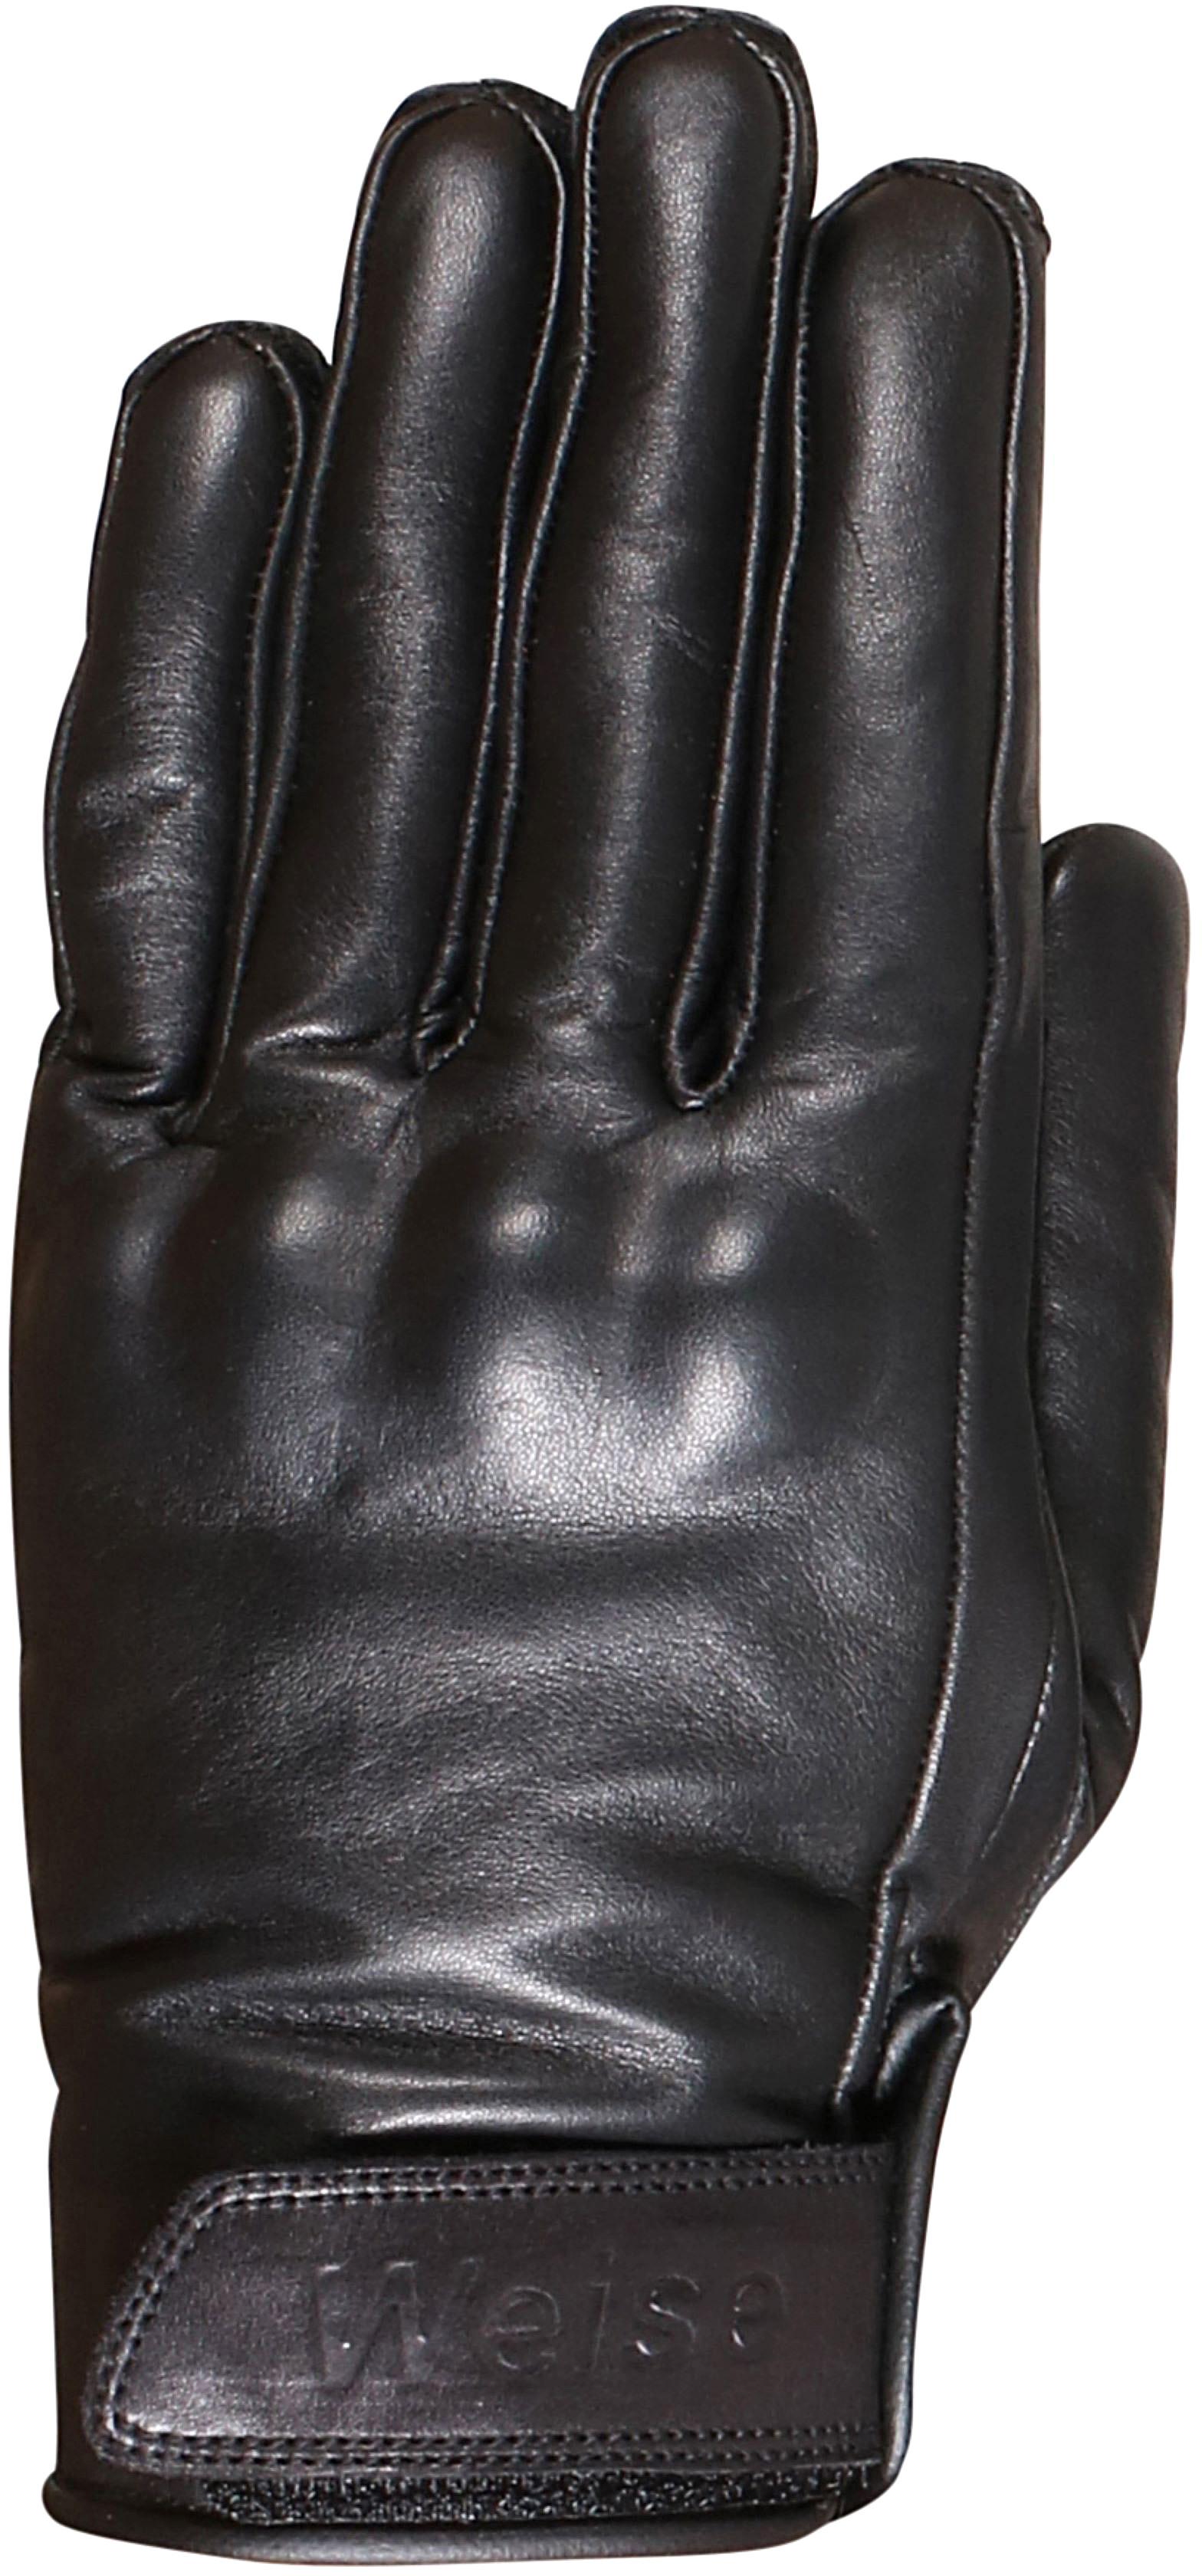 Weise Tilly Womens Motorcycle Gloves - Black, Xl